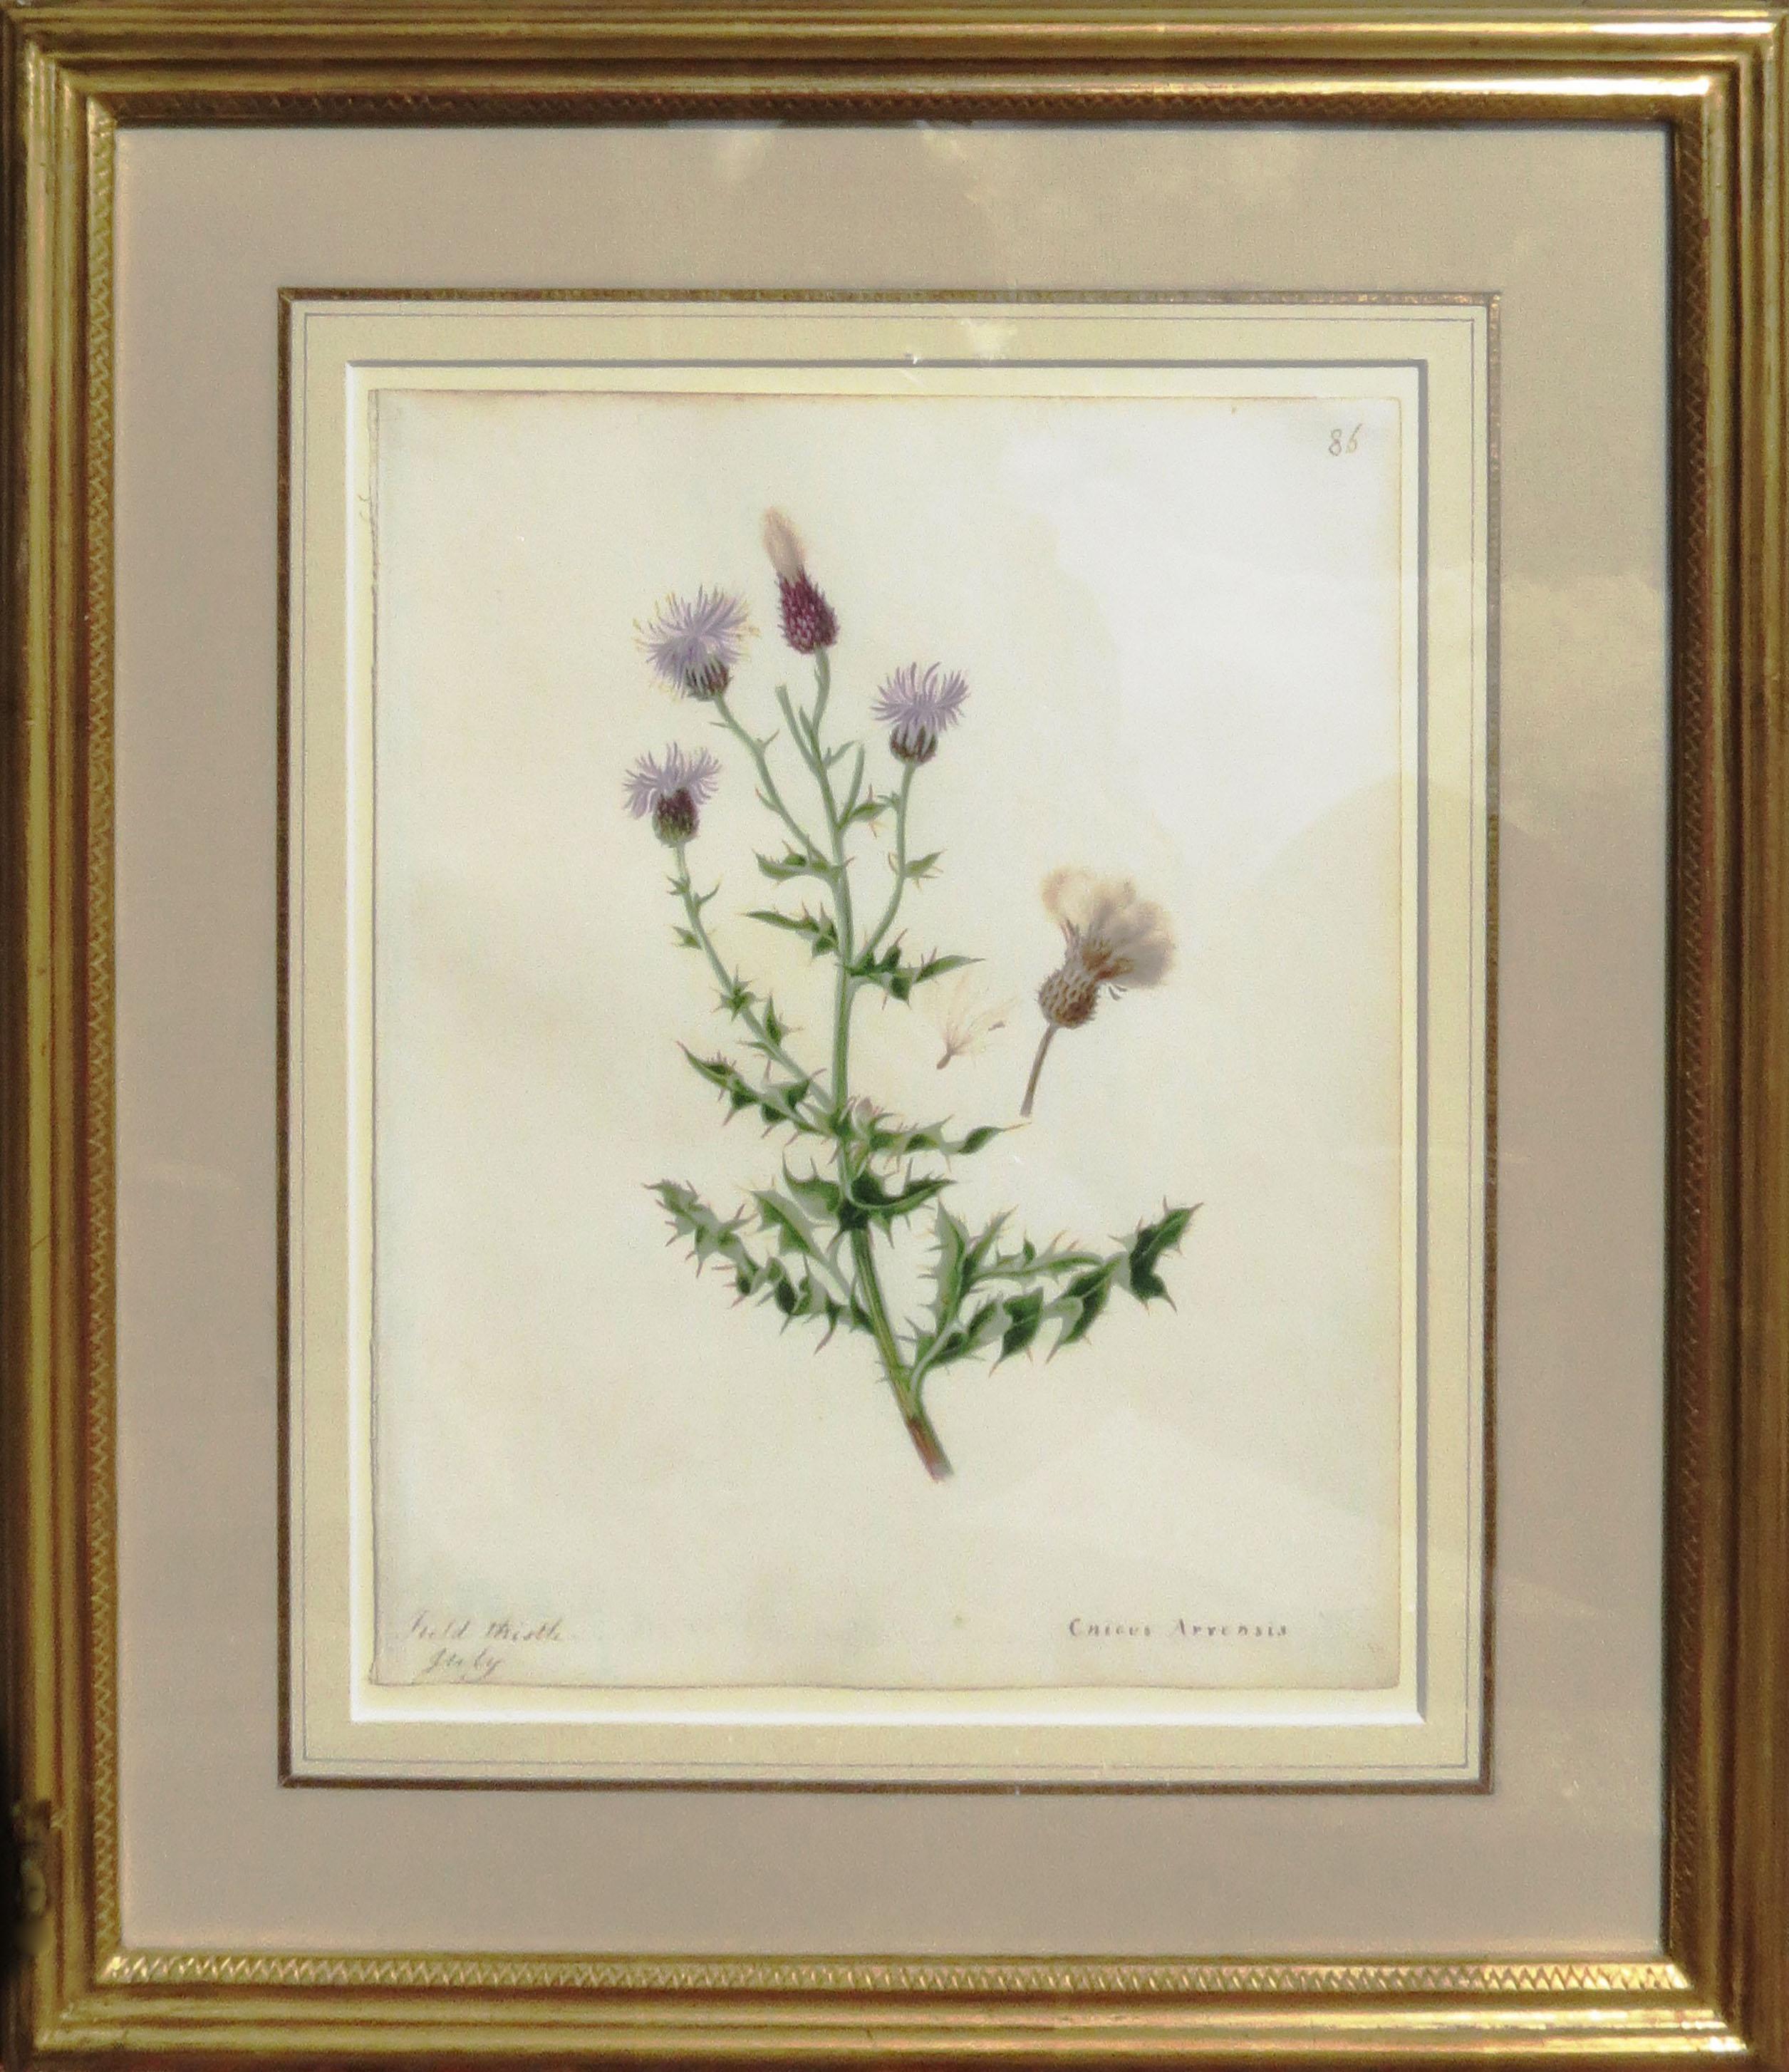 "Field Thistle - Cnicus Arrensis"